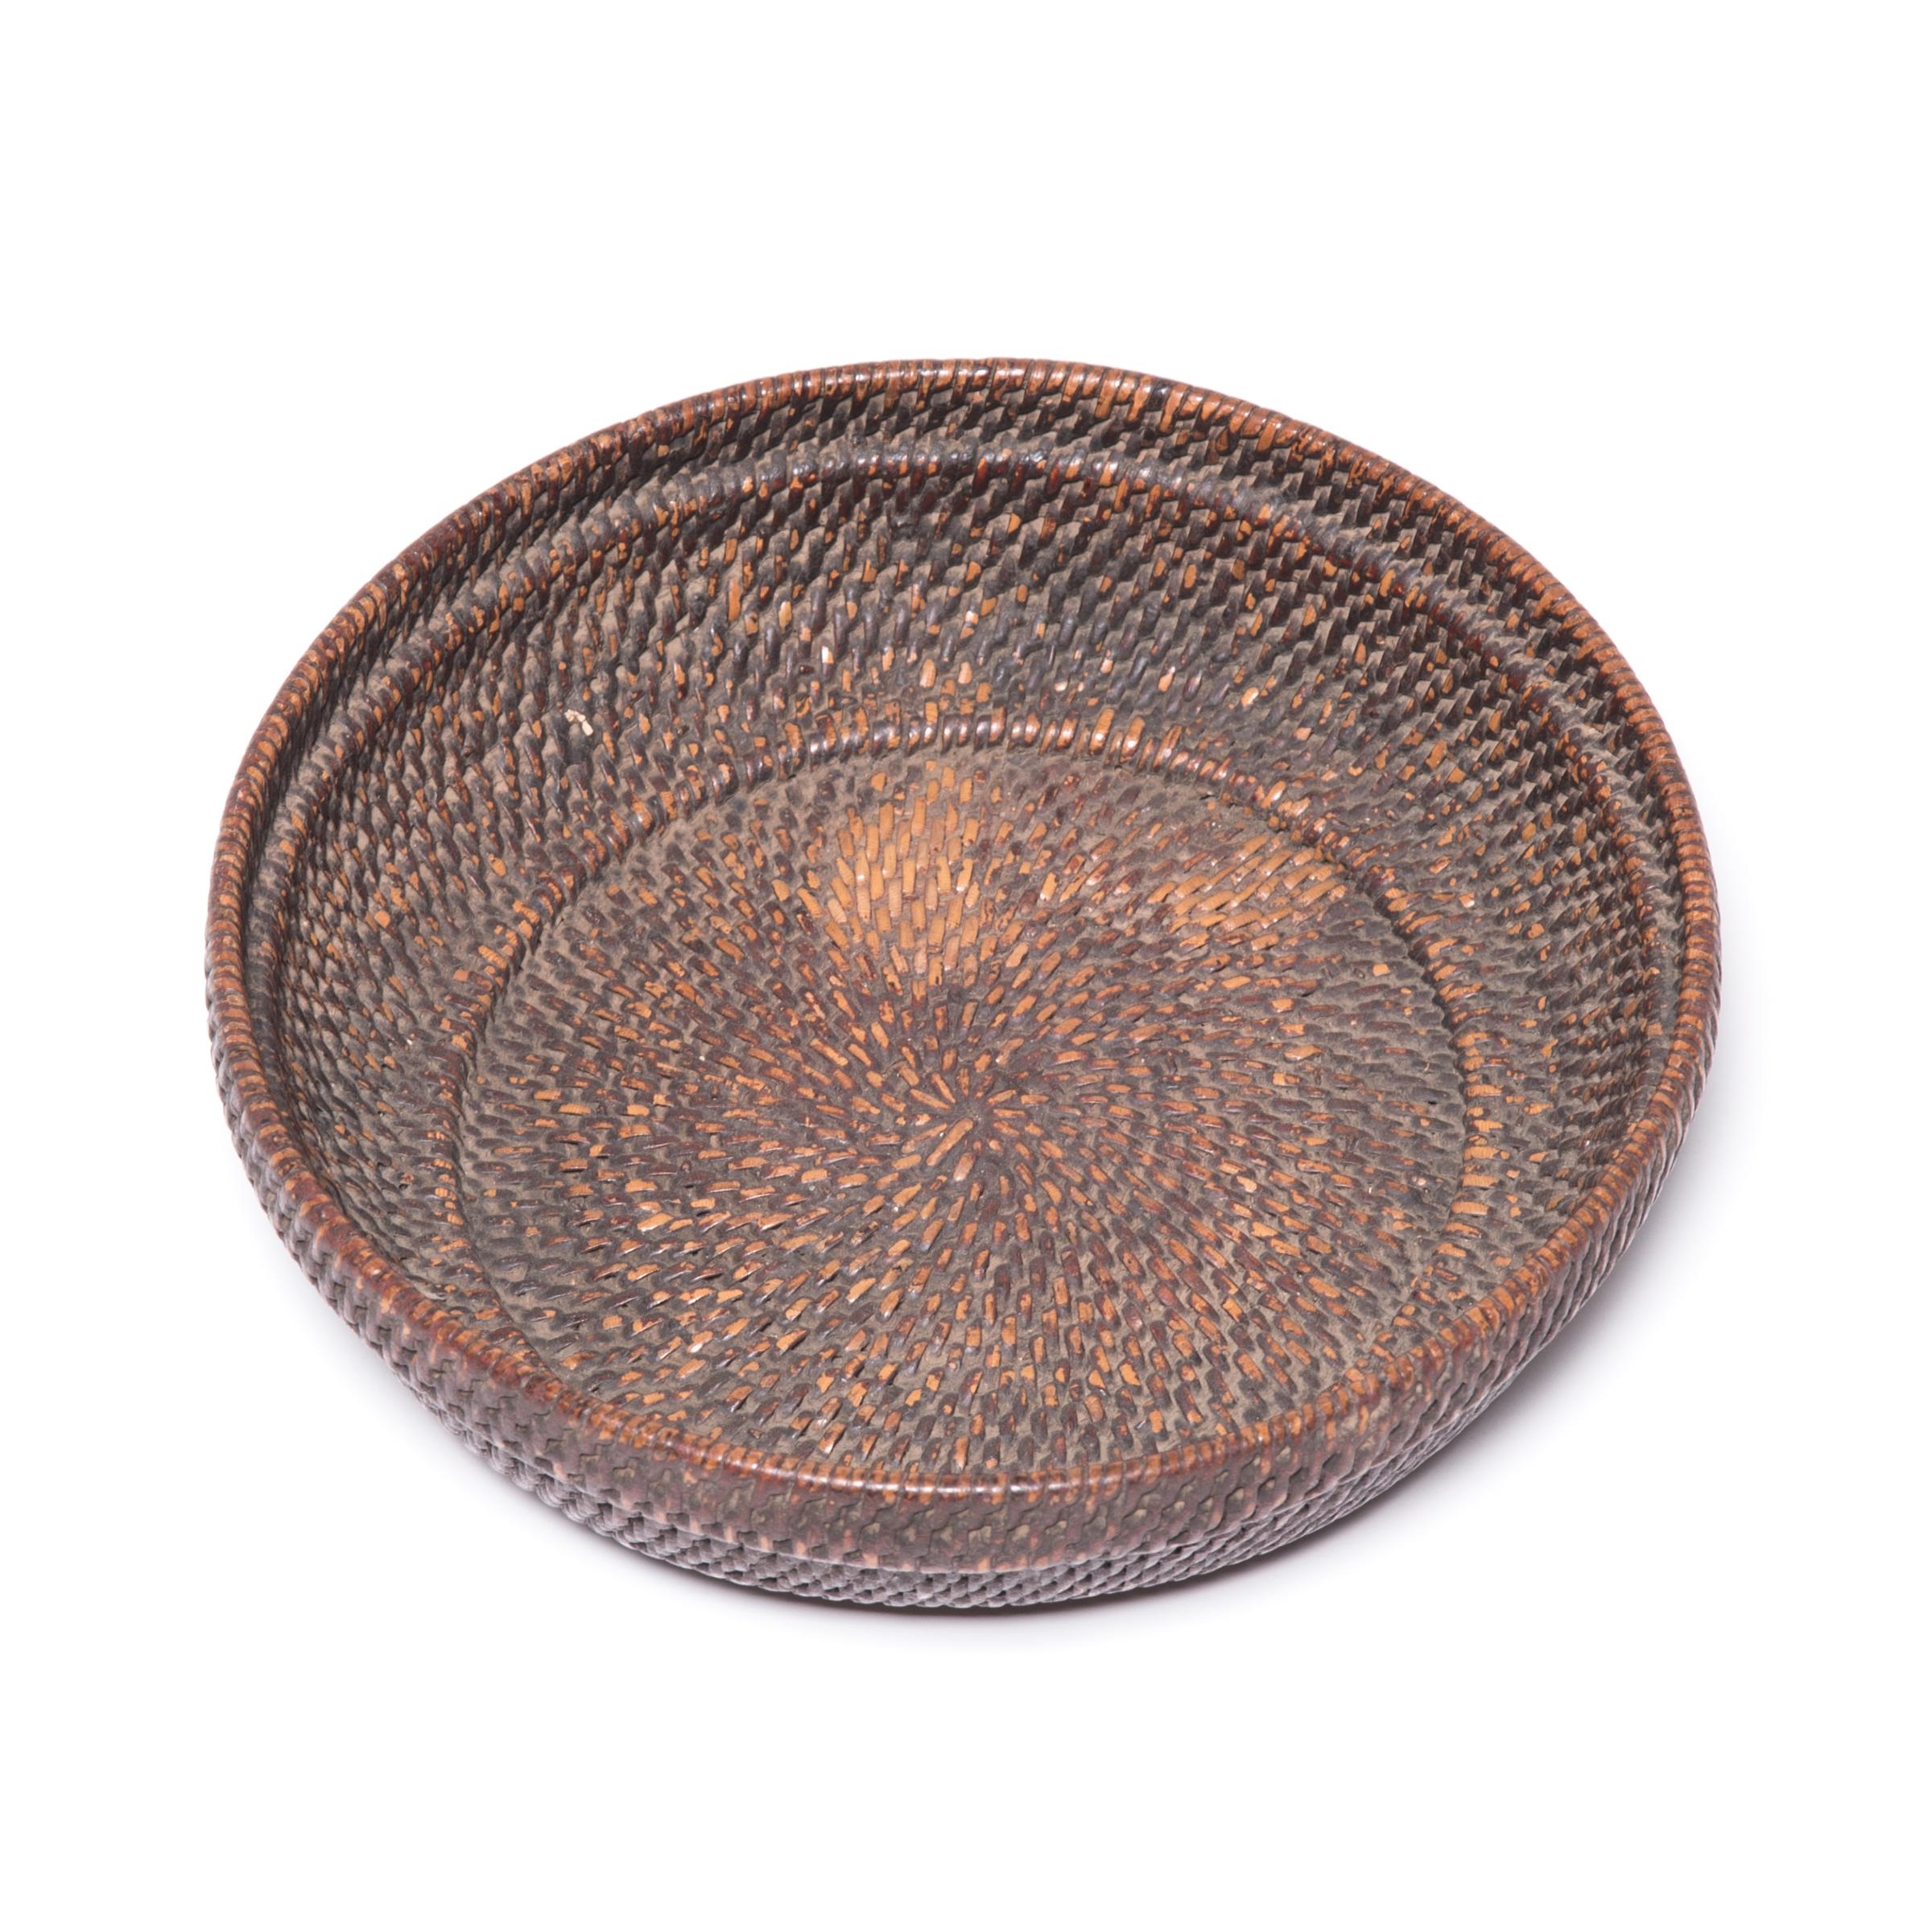 Tightly woven of natural reeds, this neat basket likely contained offerings of food, money and fruits presented as part of ritual ancestor worship on a family altar. Over the course of the past century, the original deep brown has worn just where